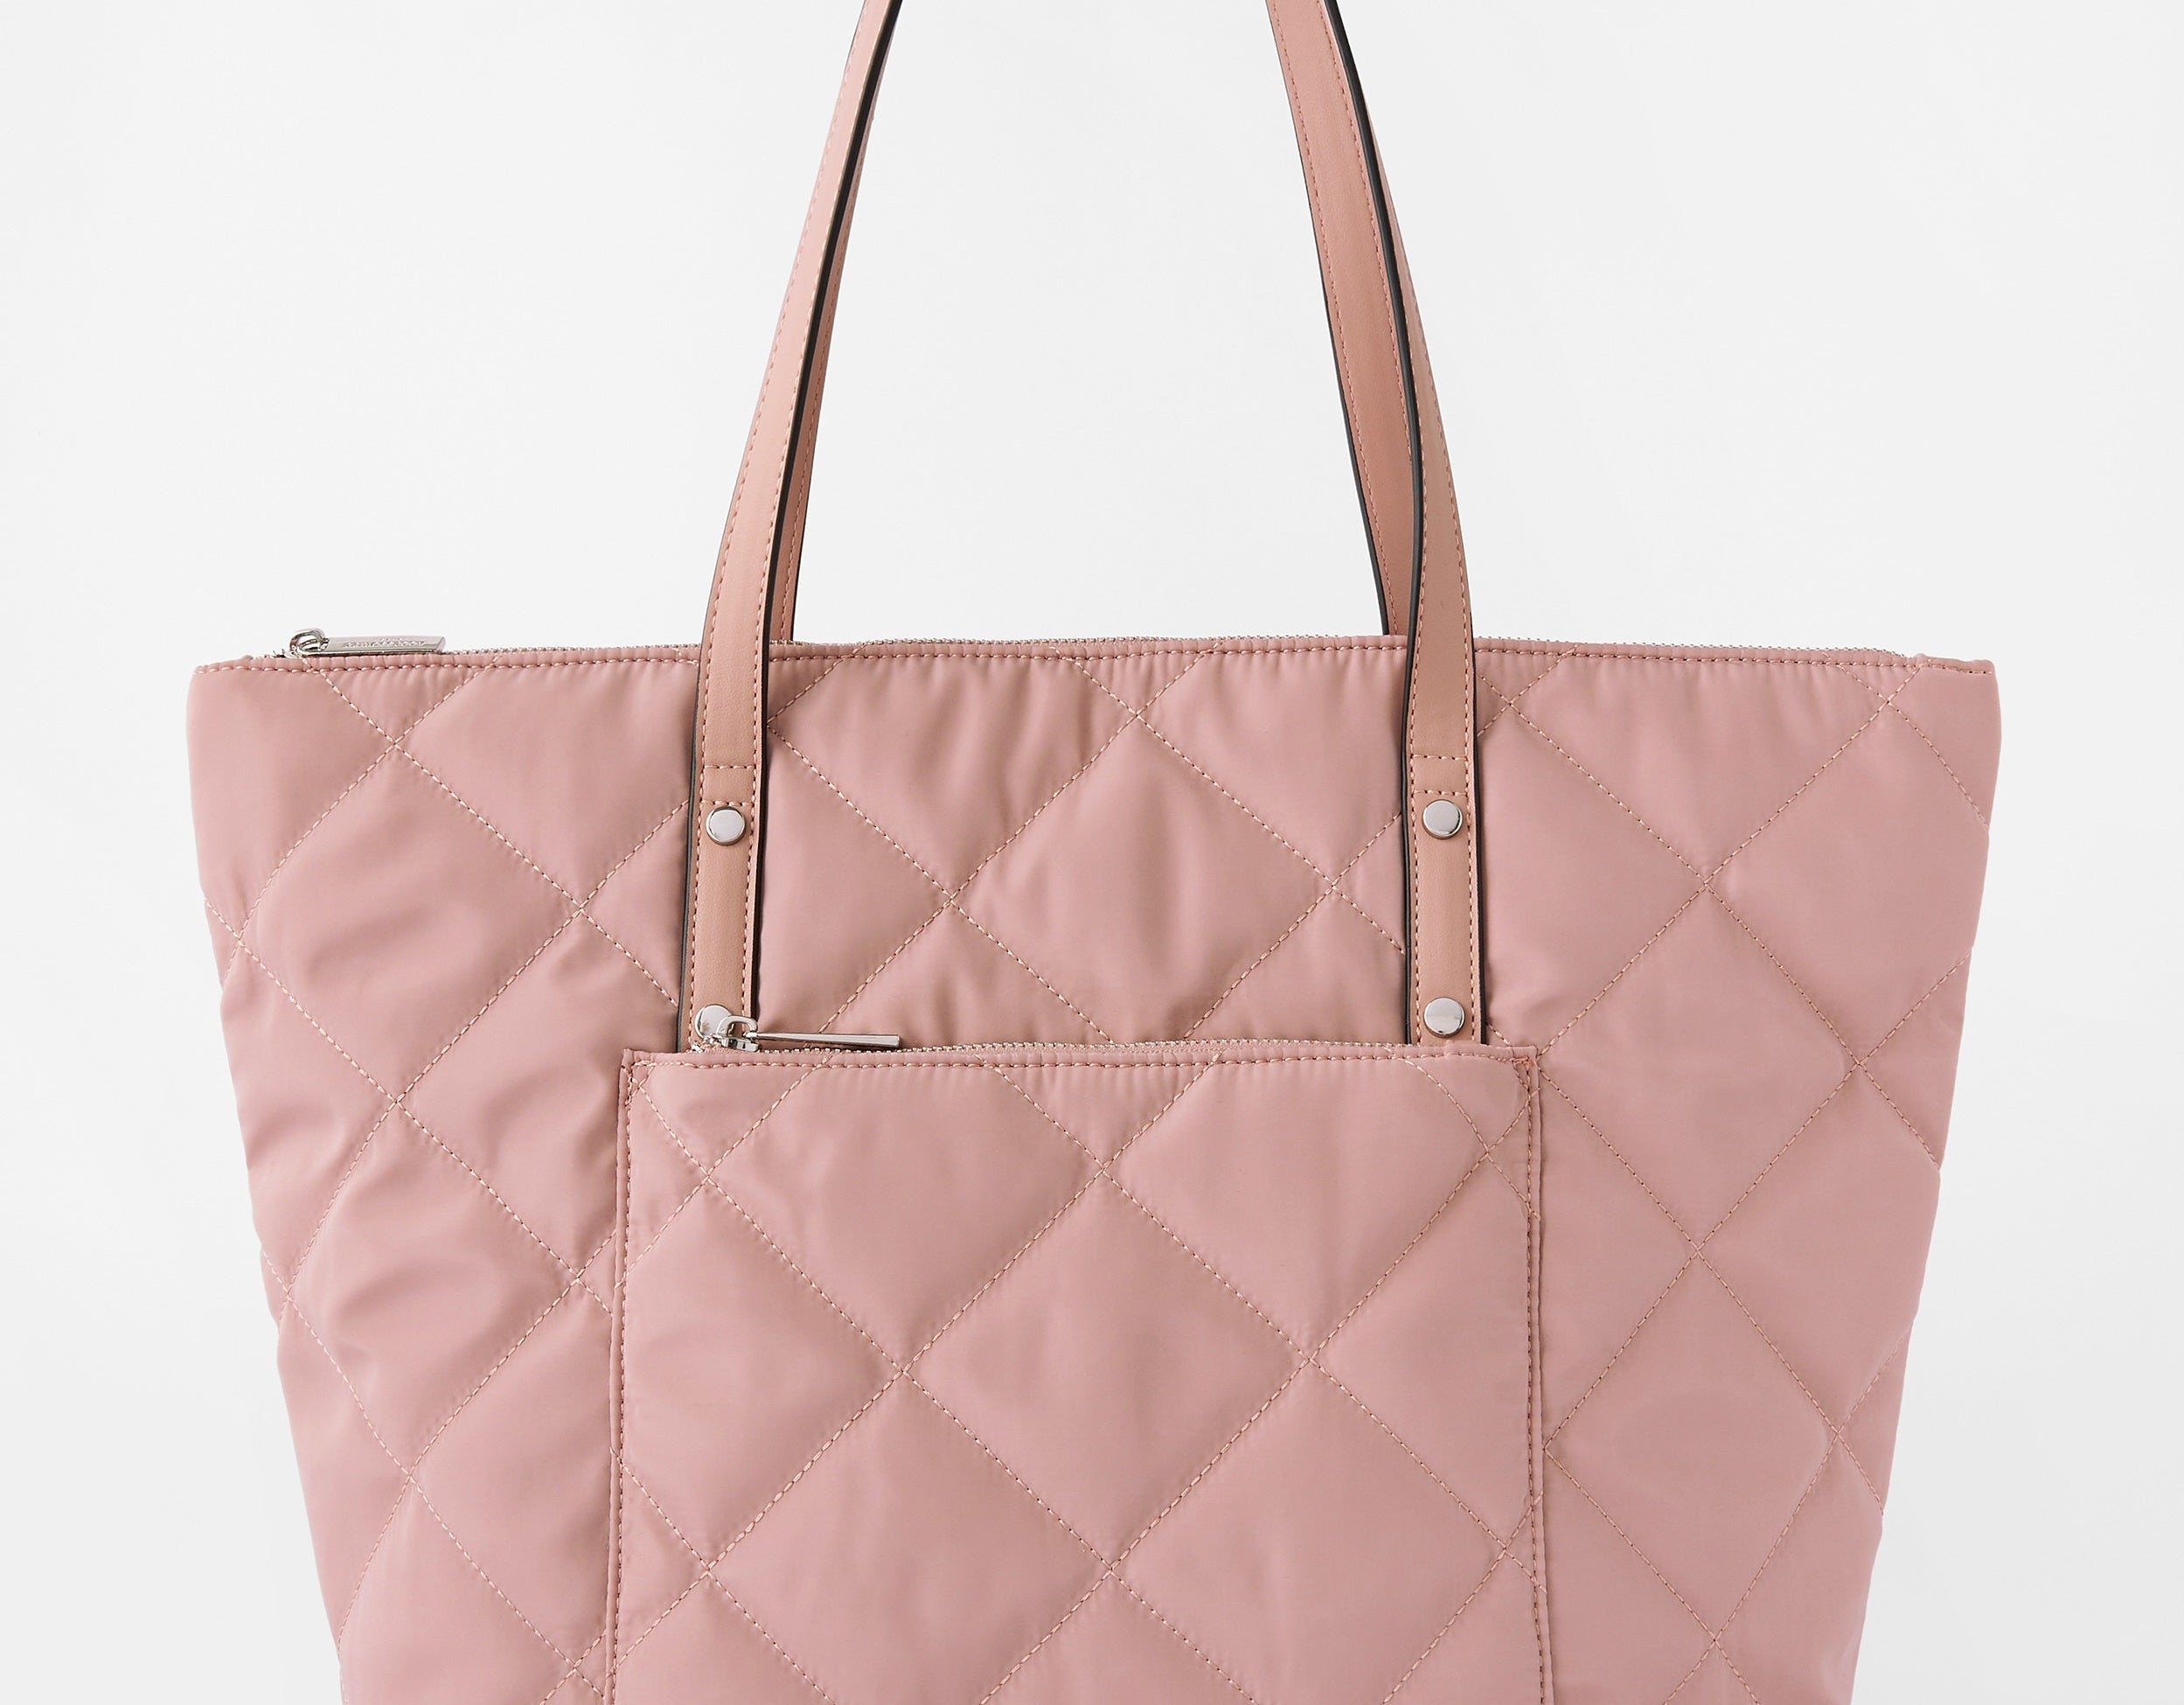 Accessorize London Tilly quilted tote